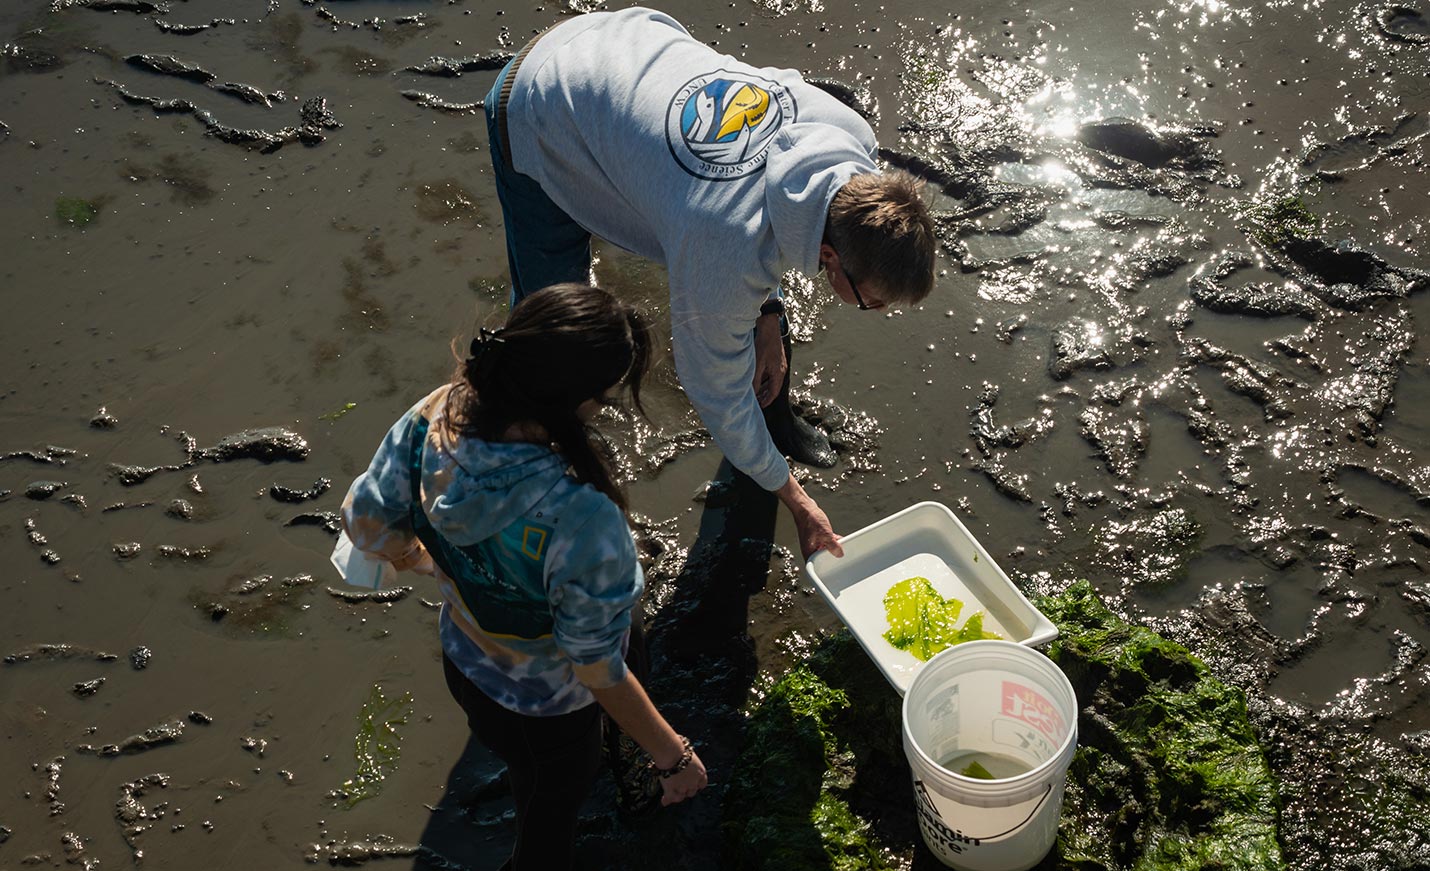 Students look at algae in a muddy area near the water